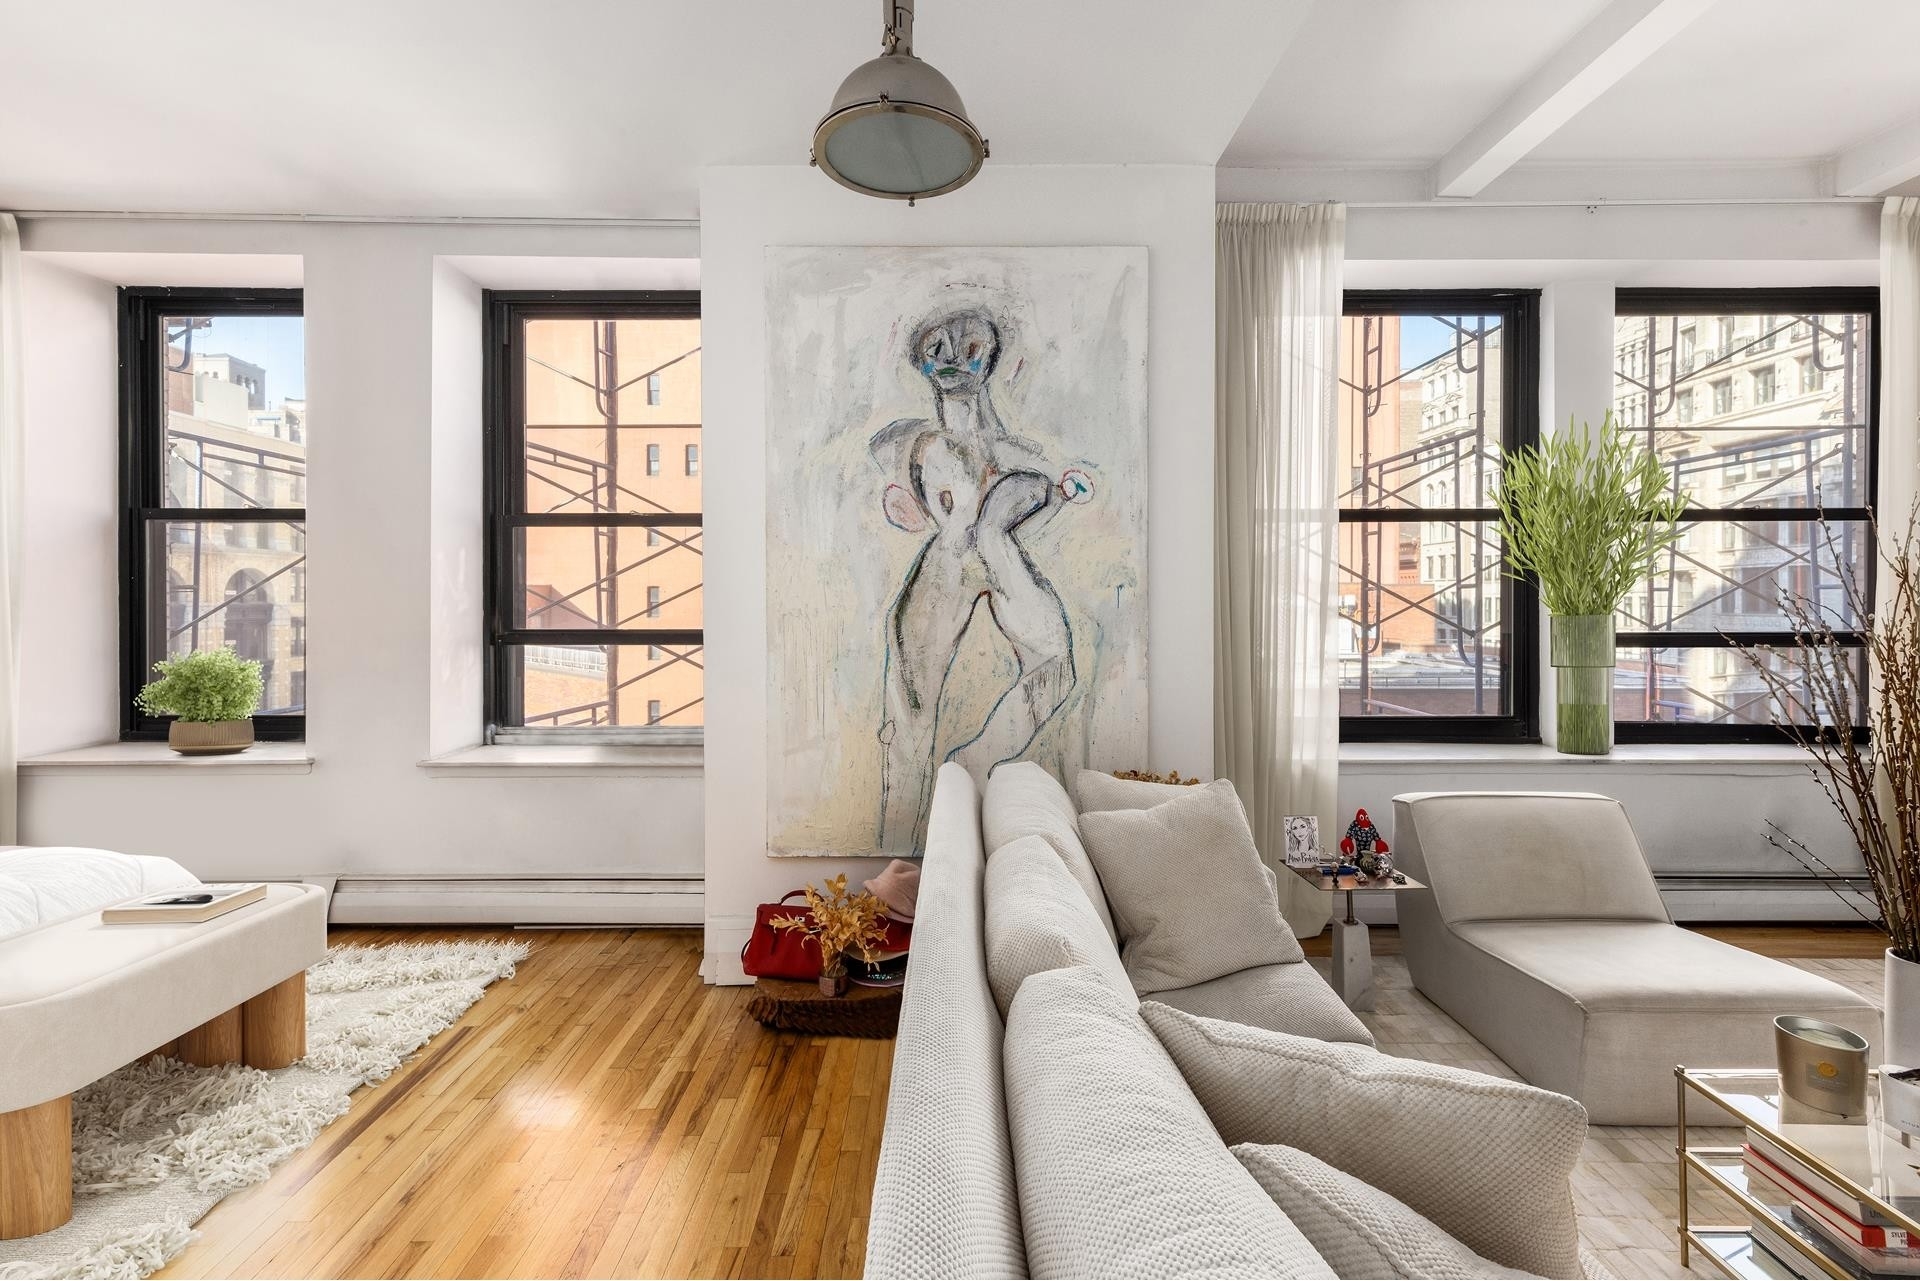 Co-op Properties for Sale at Mercer House, 250 MERCER ST, C603 Greenwich Village, New York, New York 10012